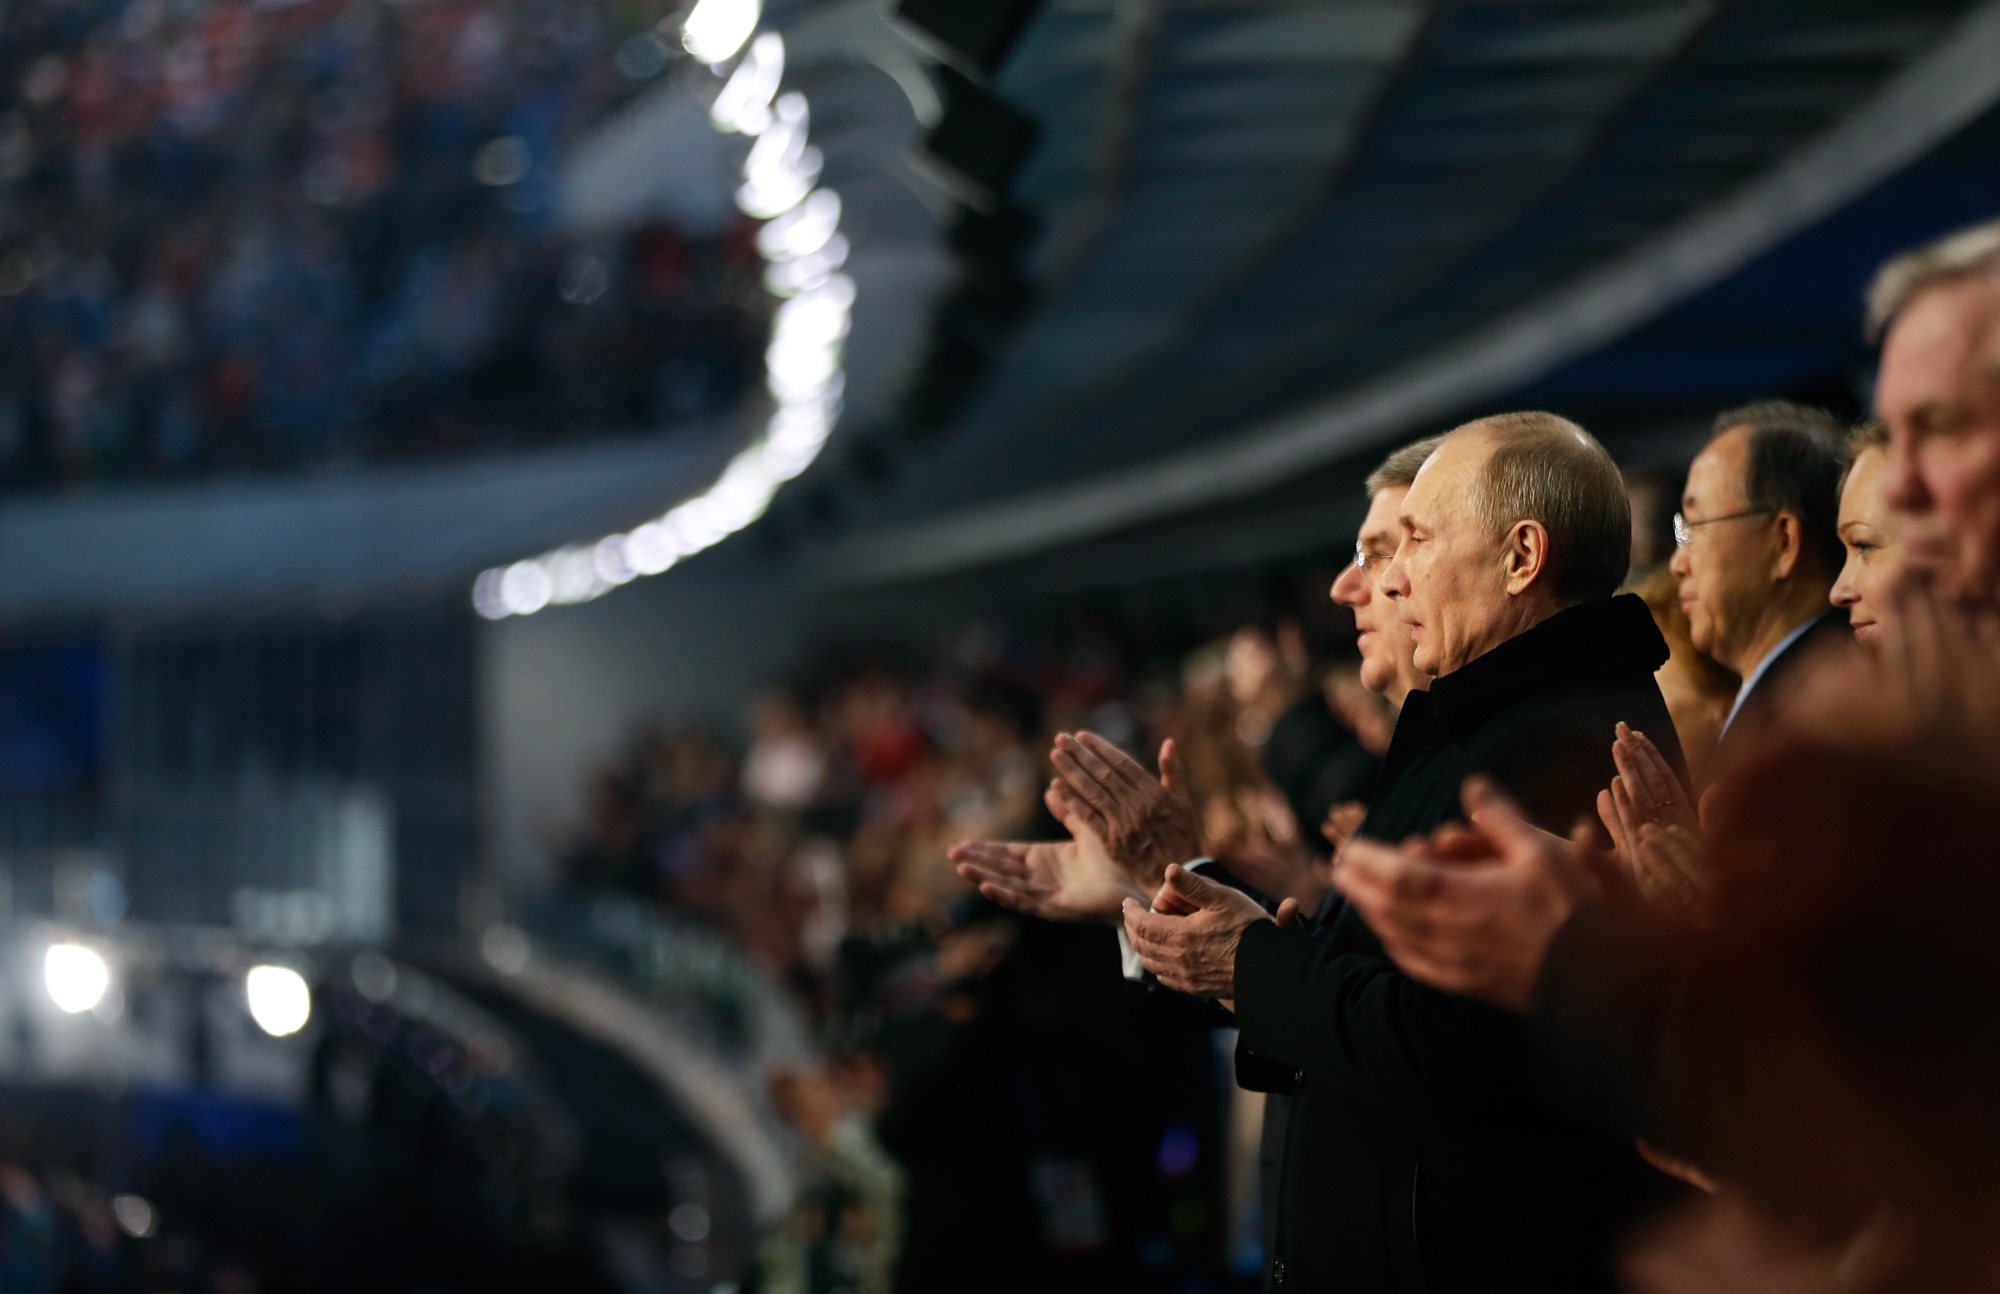 Russian President Vladimir Putin, right, and International Olympic Committee President Thomas Bach, left, applaud during the playing of the Russian national anthem.